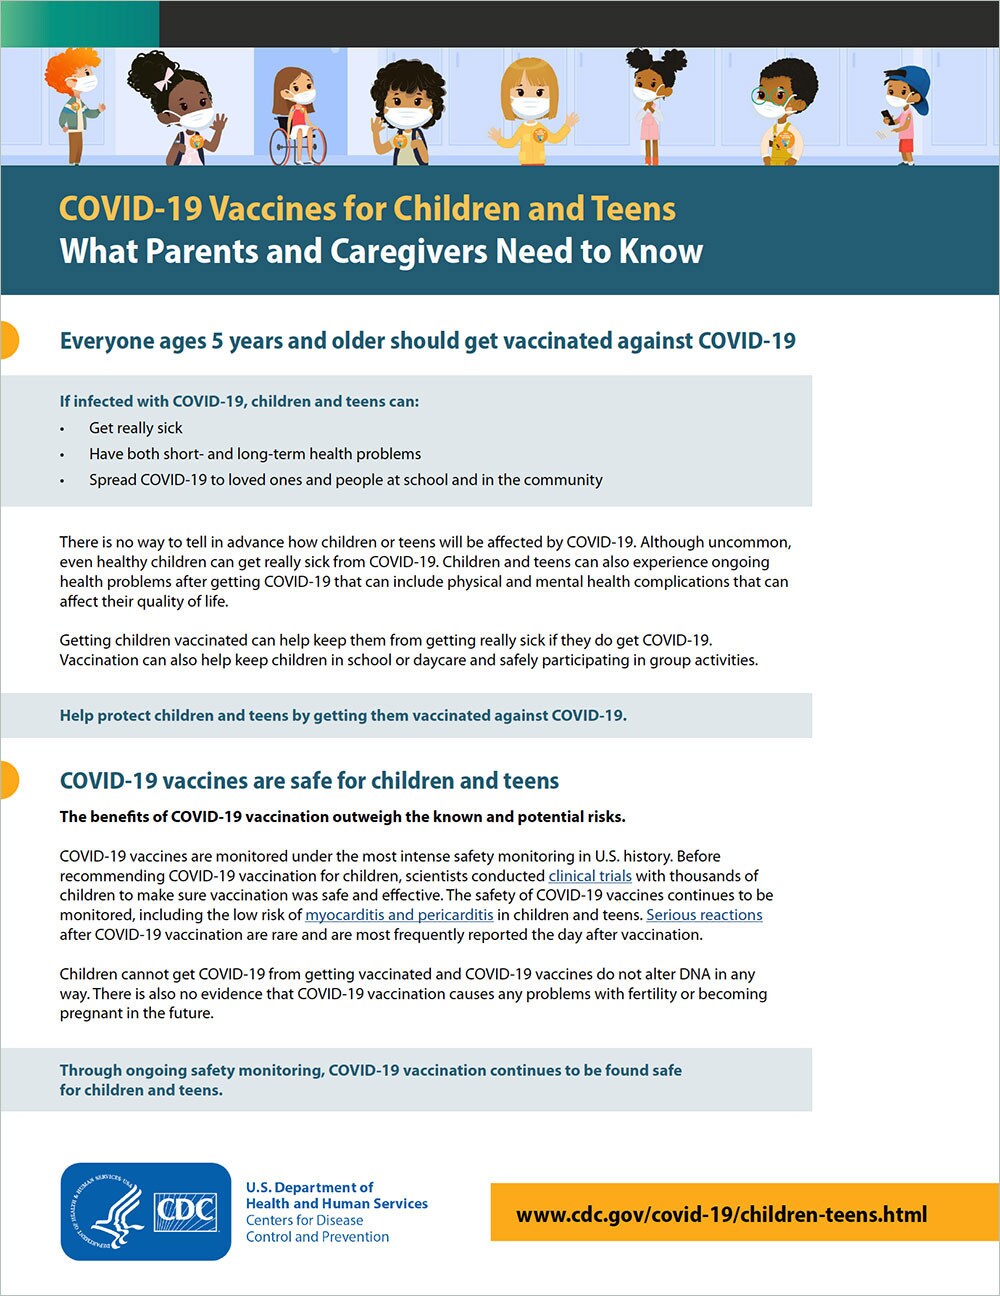 COVID-19 Vaccines for Children and Teens. What Parents and Caregivers Need to Know.